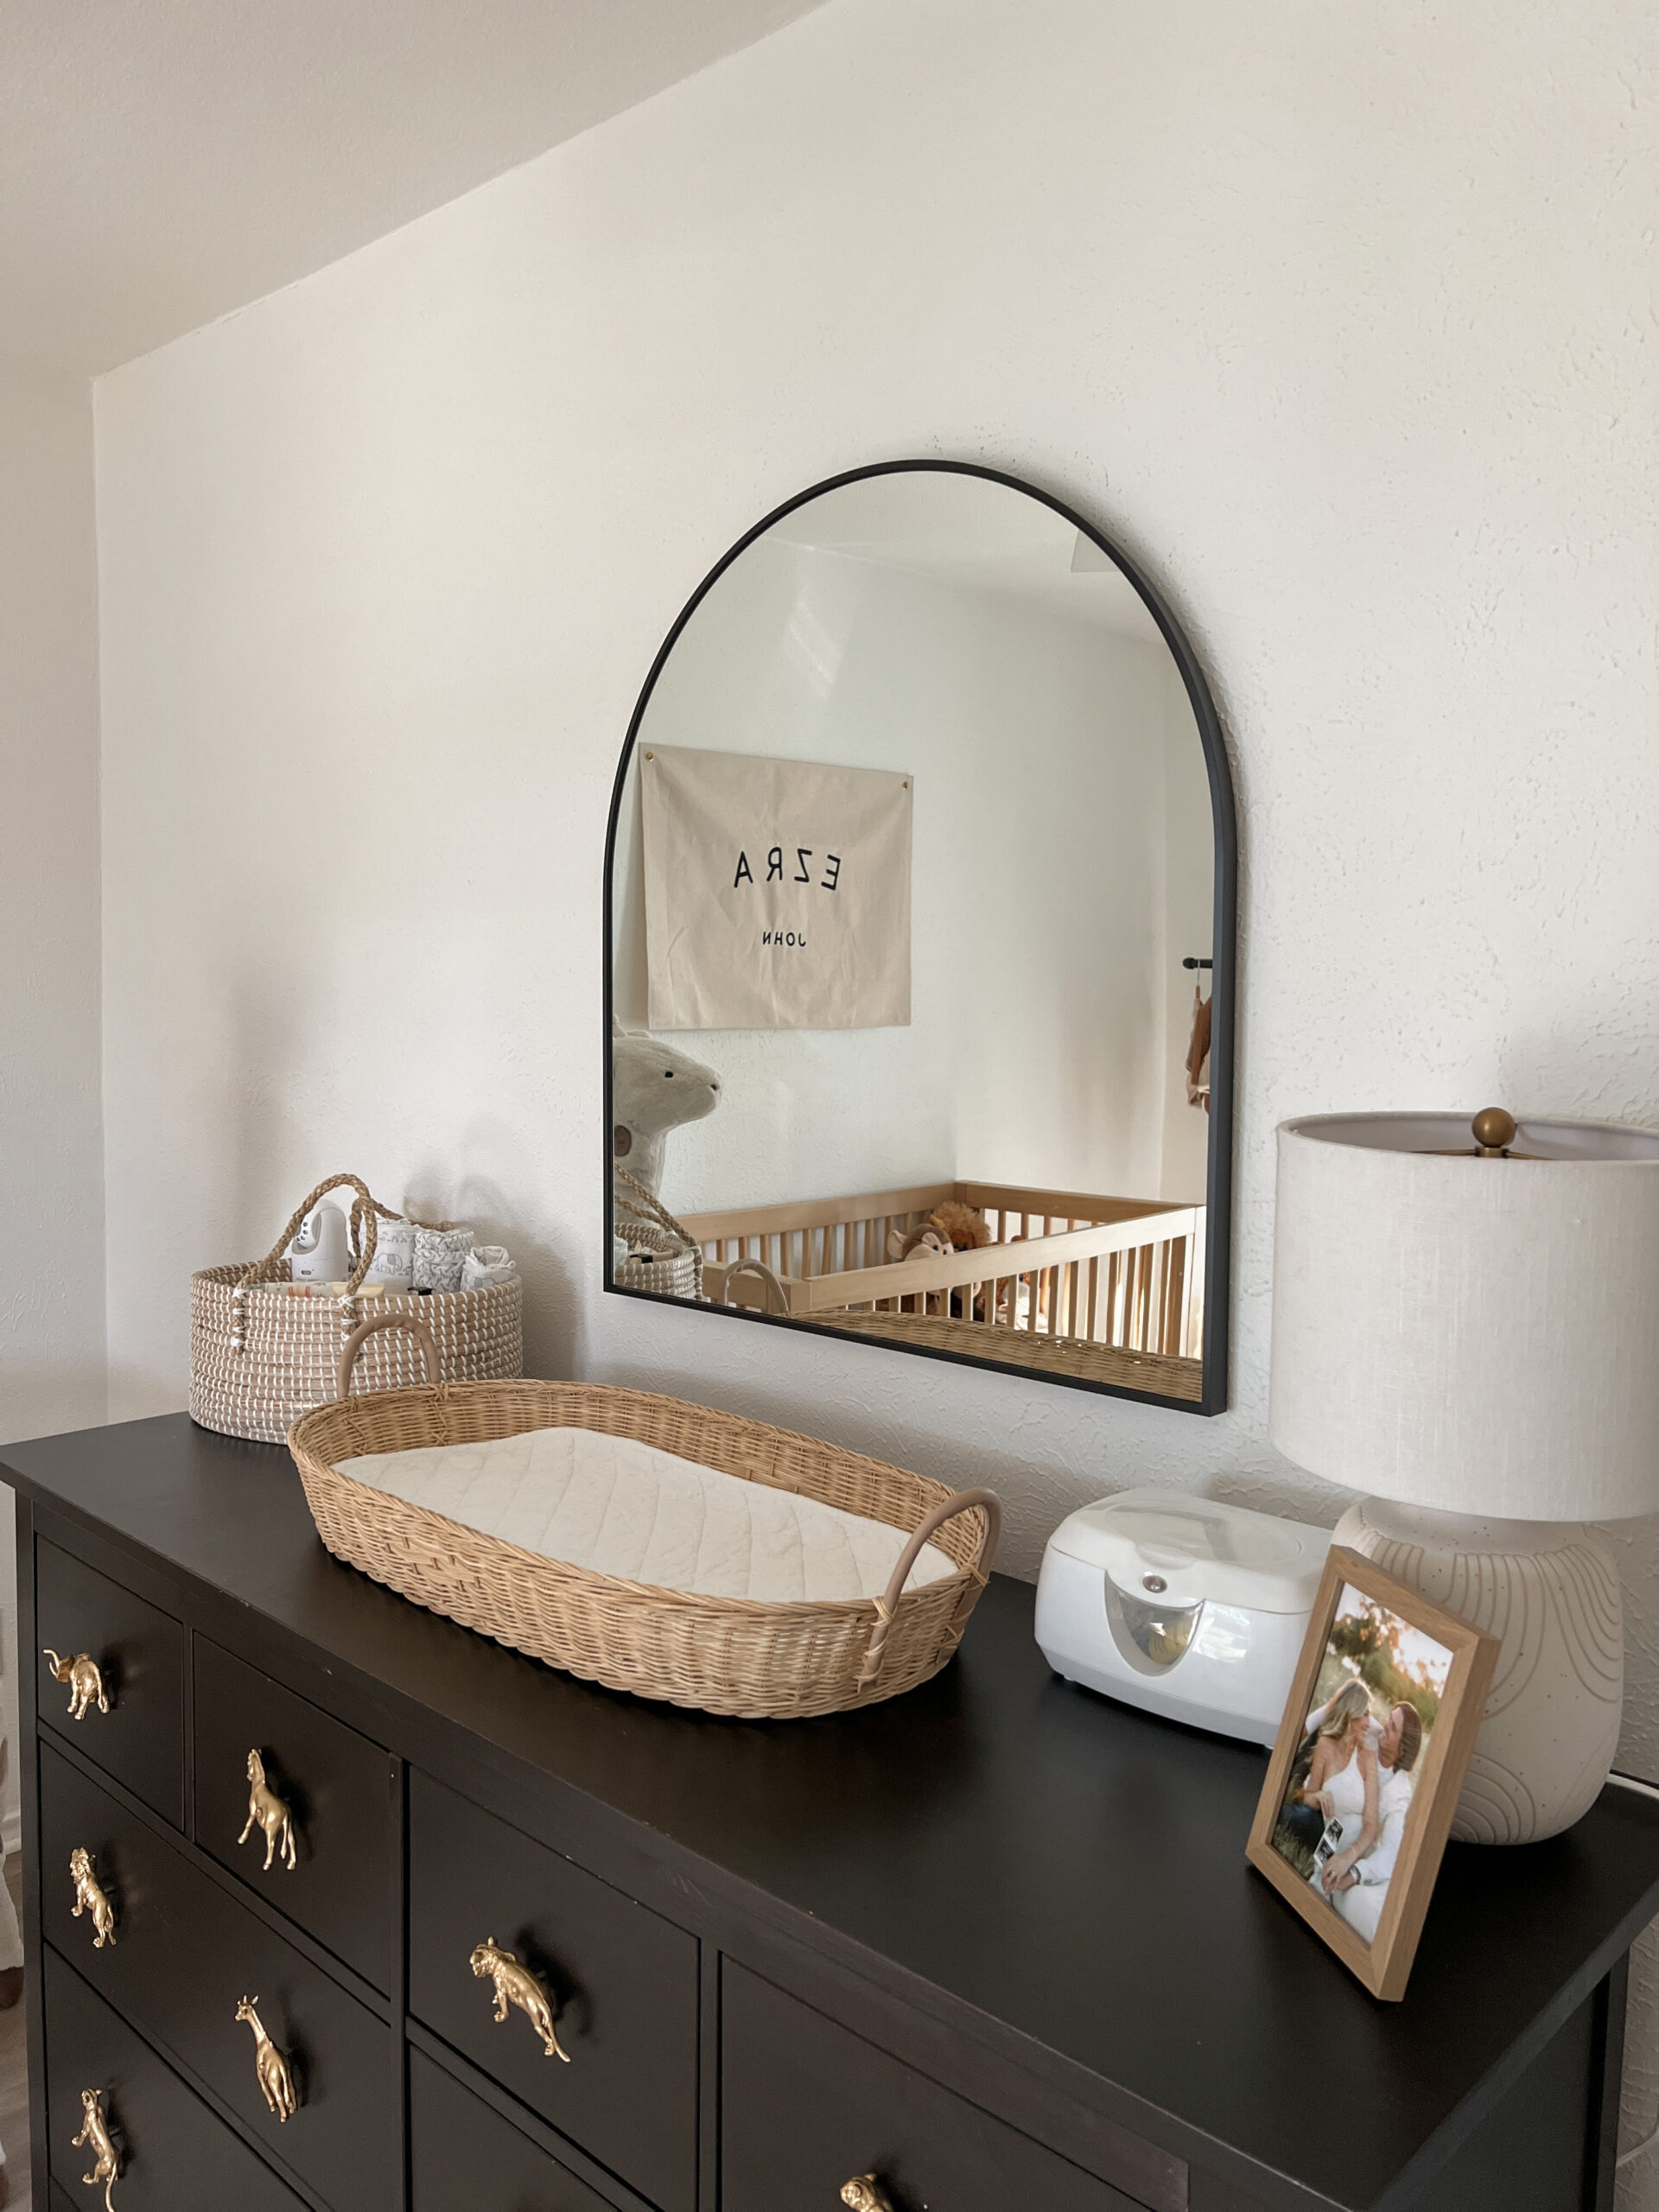 Moses Changing Basket | Cute Changing Dresser